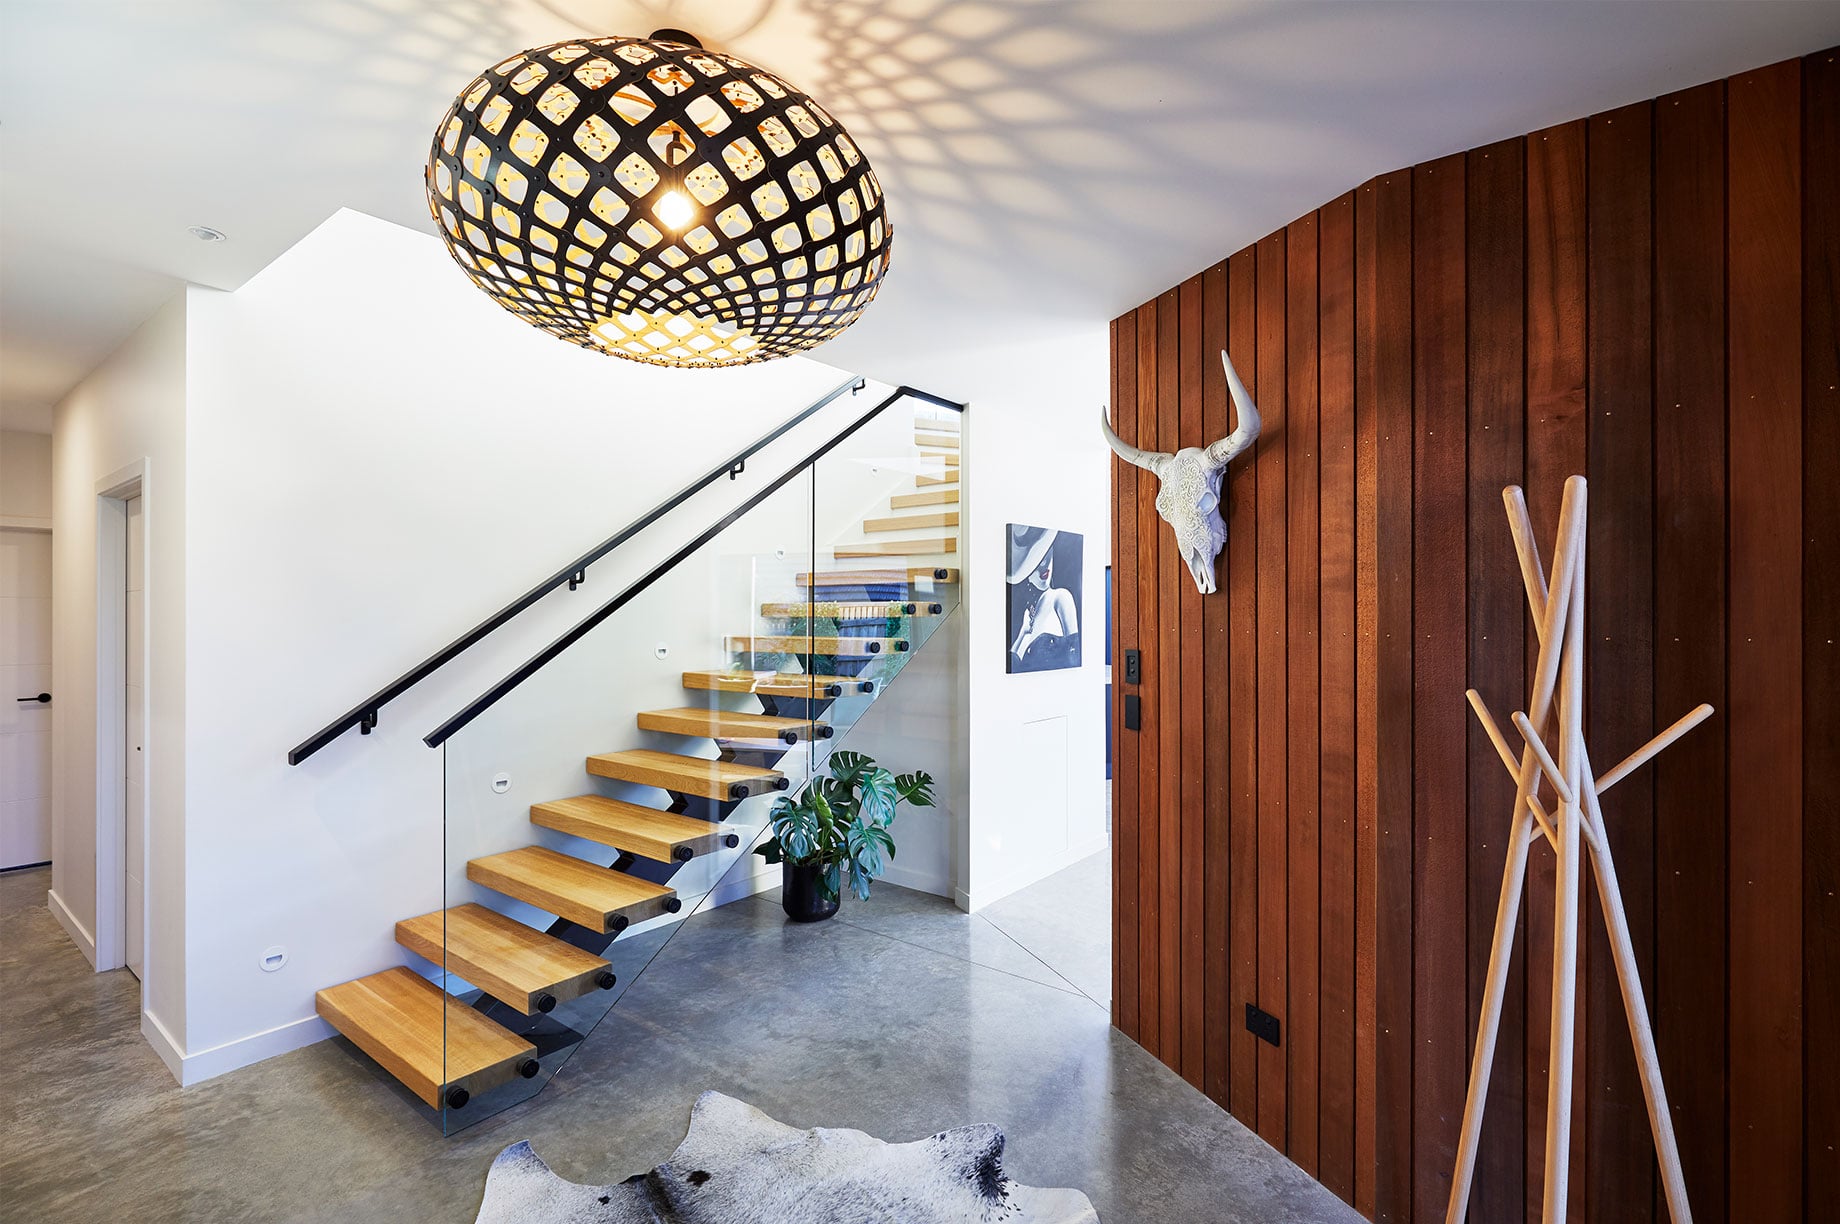 Internal wooden staircase